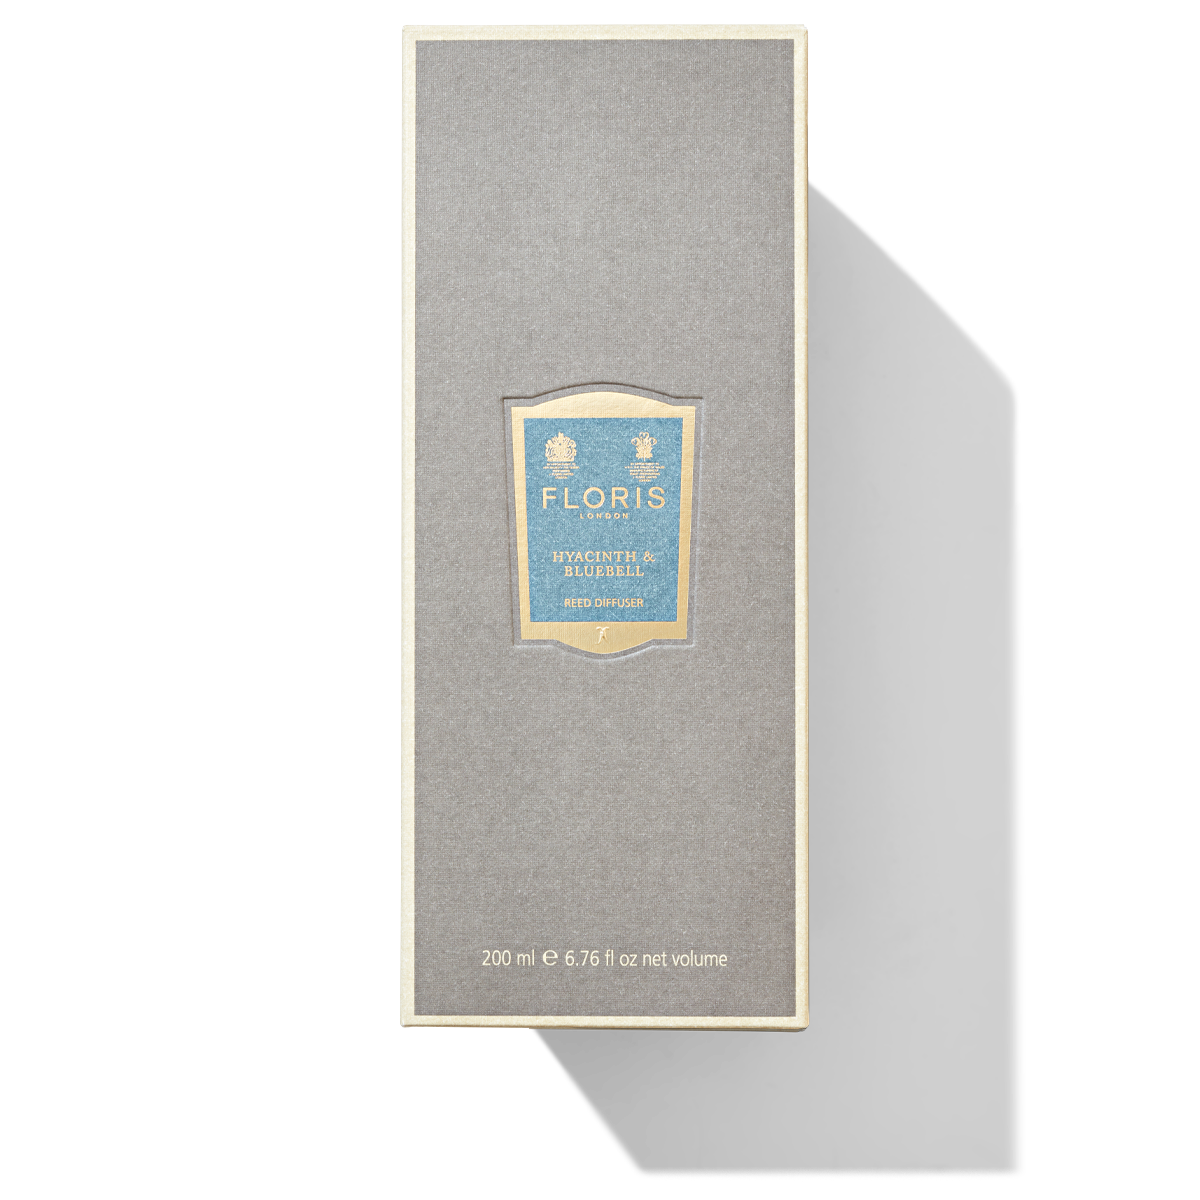 Grey and Blue Floris London Hyacinth & Bluebell Reed Diffuser Box